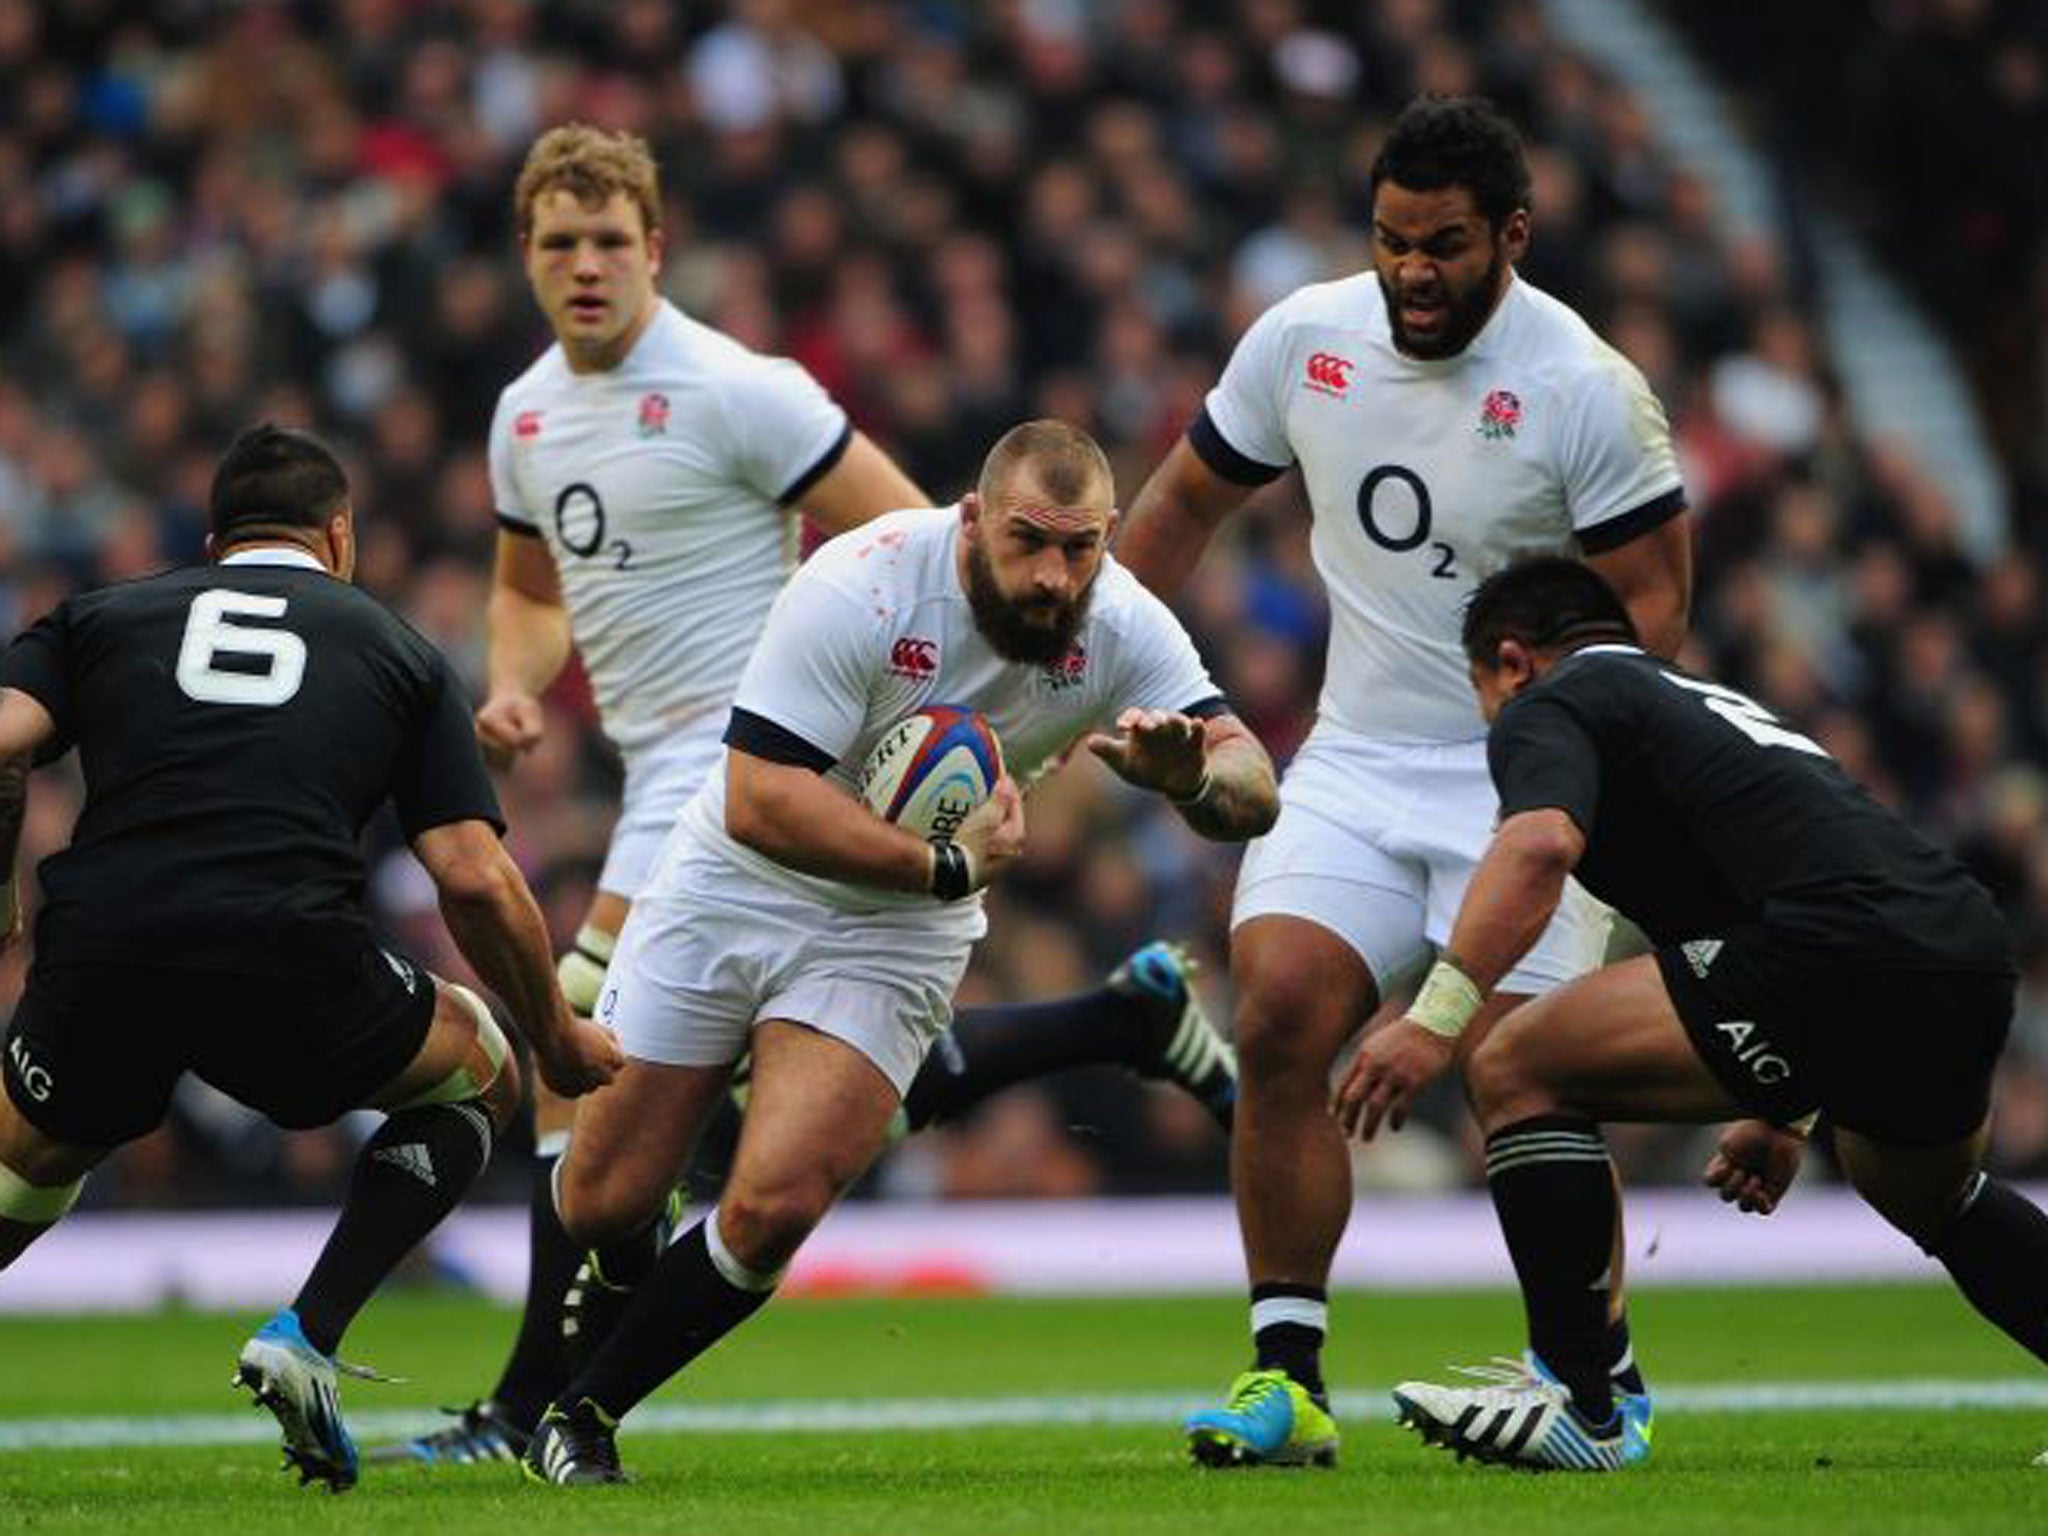 Joe Marler charges through the New Zealand defence on Saturday